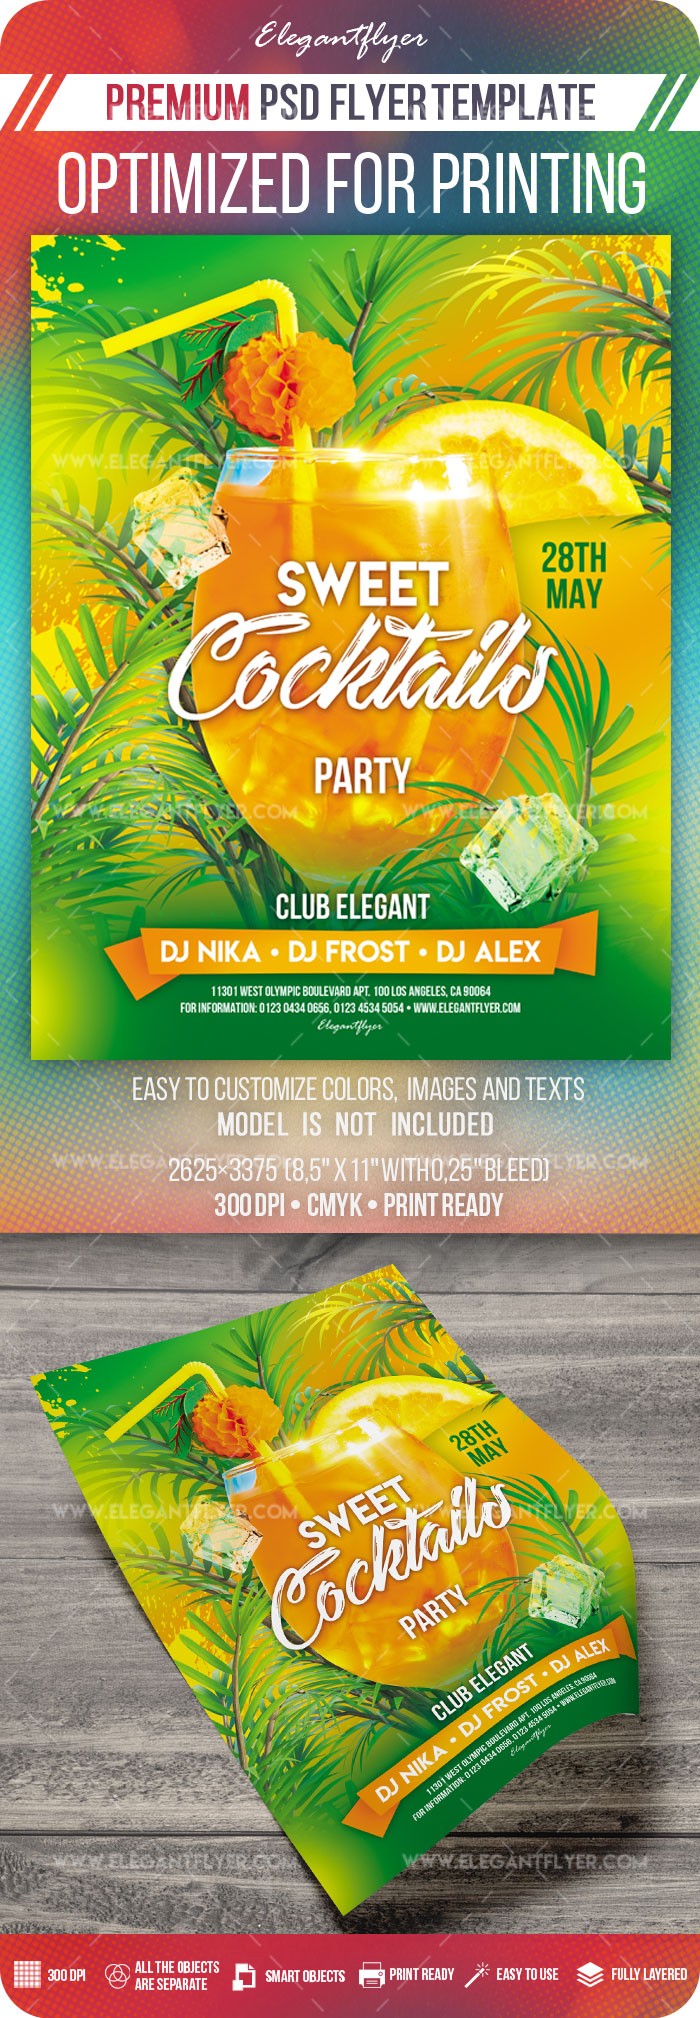 Sweet Cocktails Party by ElegantFlyer